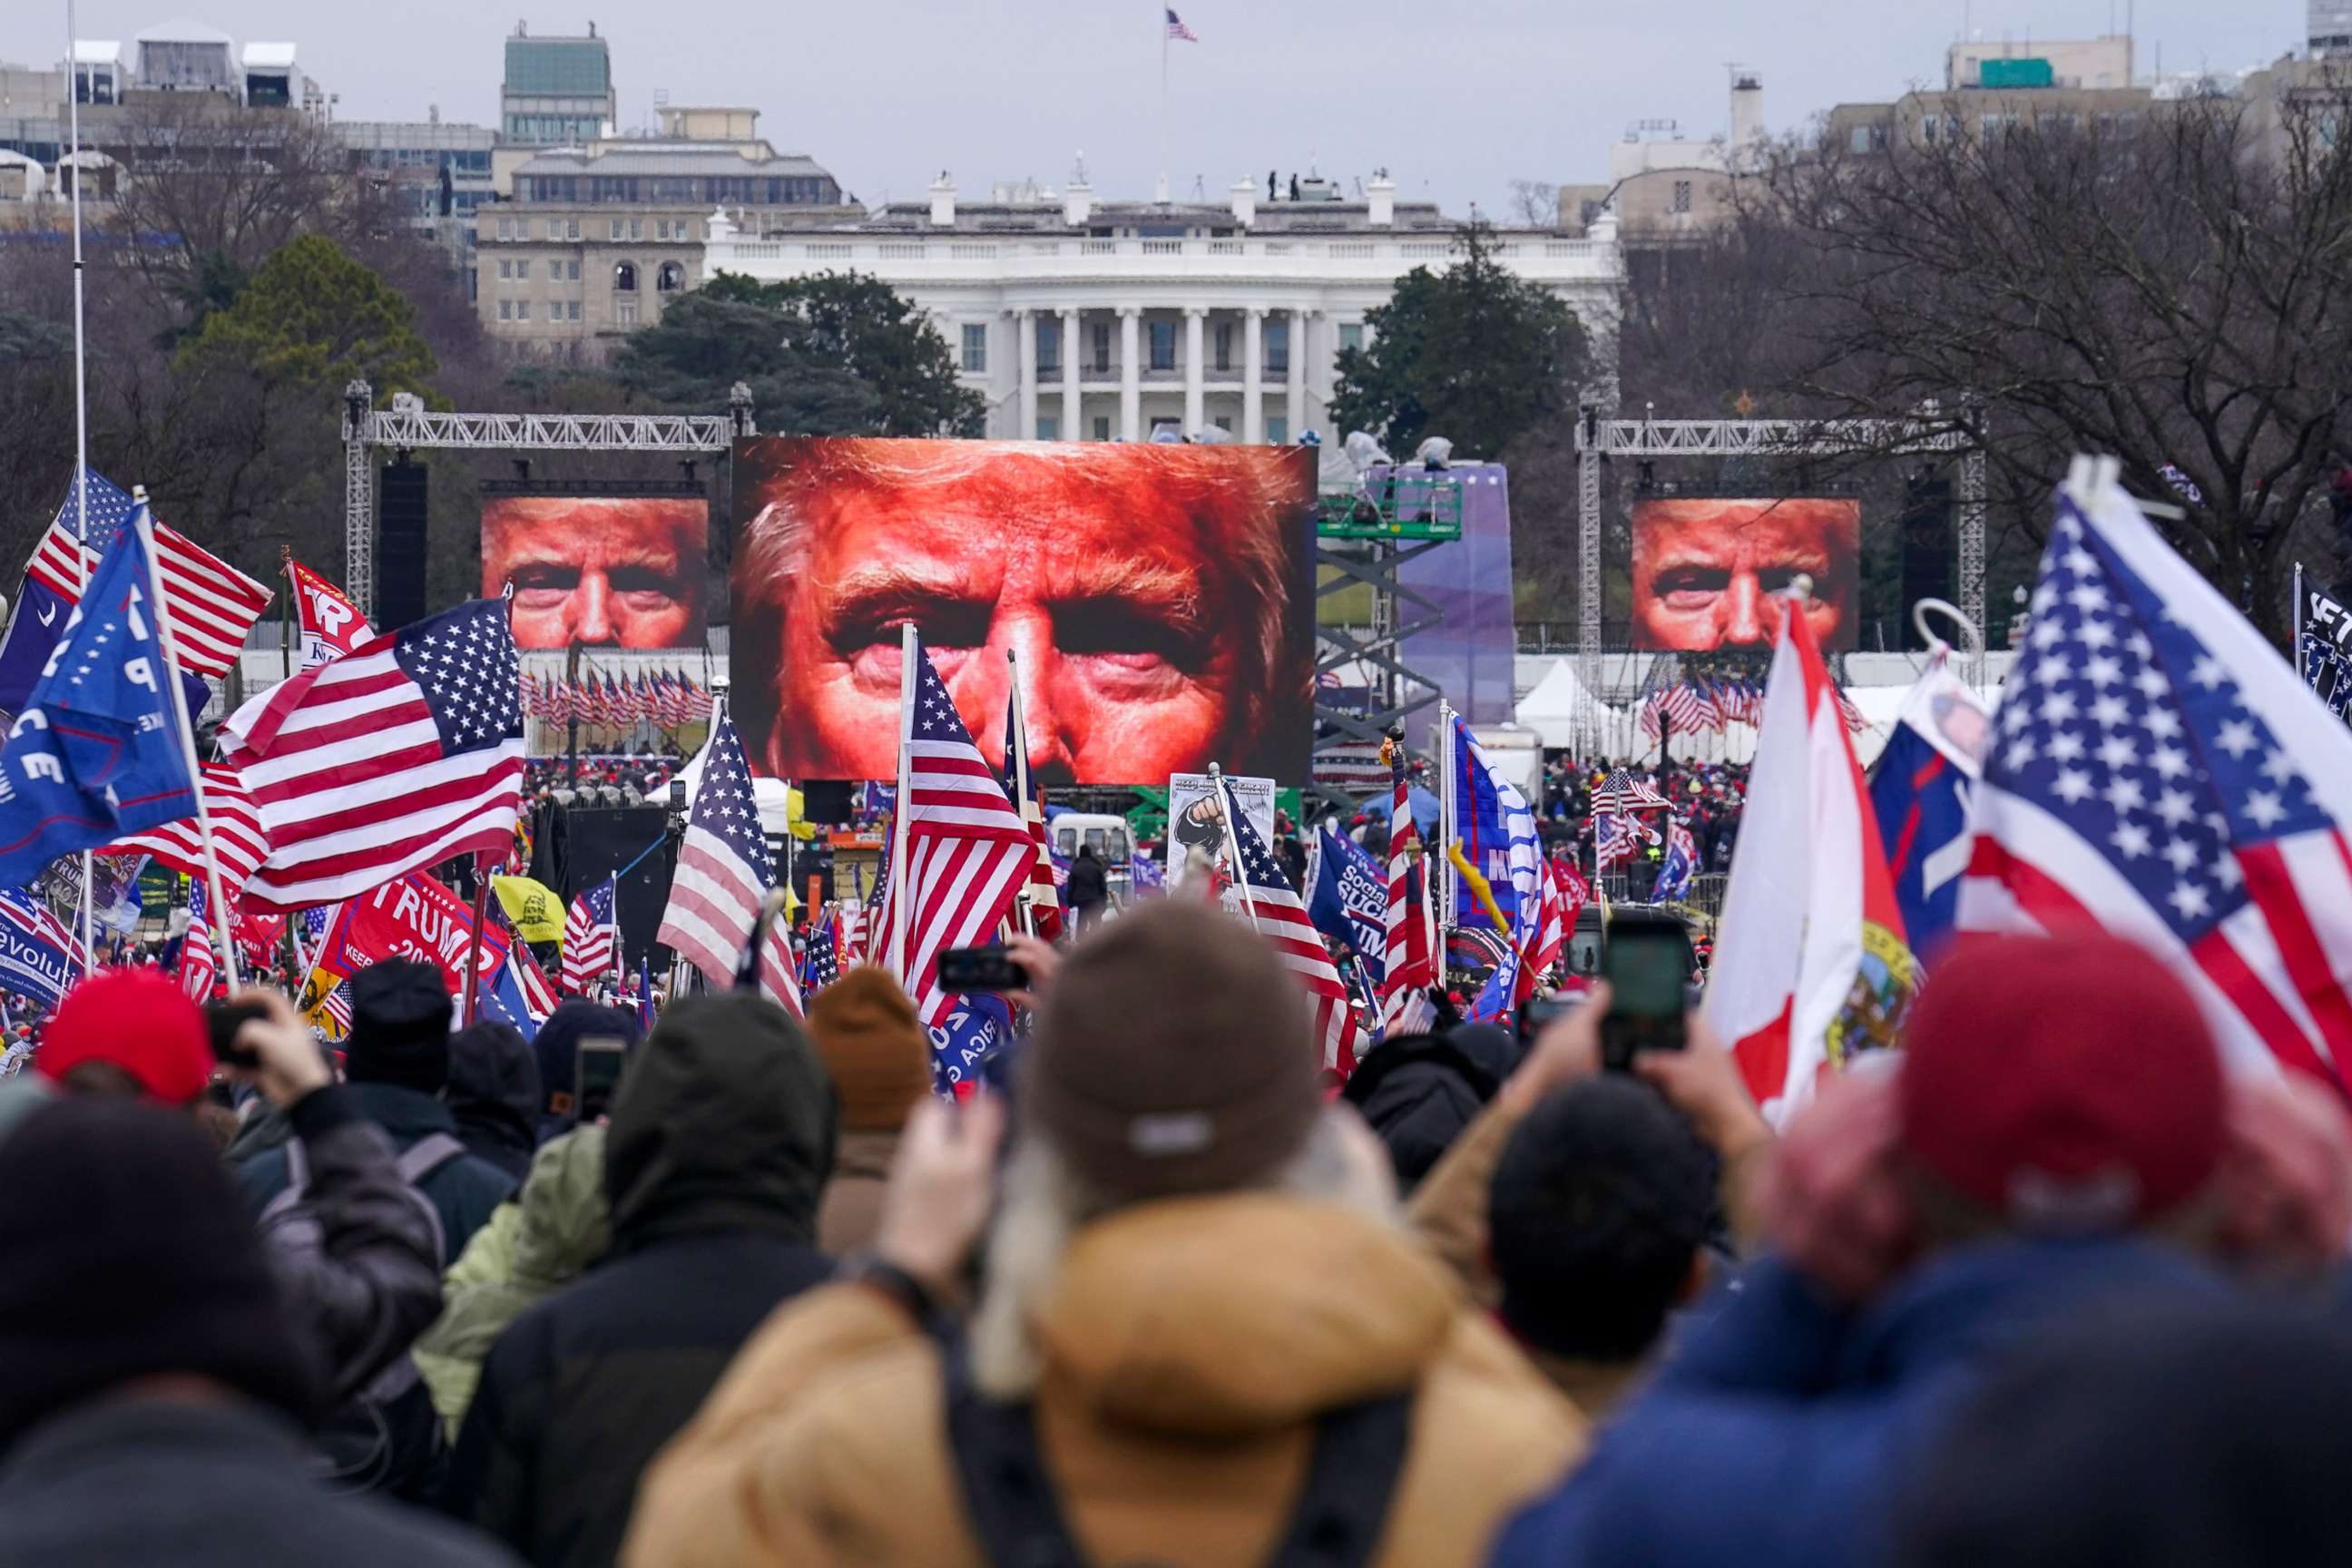 PHOTO: Trump supporters participated in a rally, Jan. 6, 2021, in Washington, D.C. As Congress prepares to affirm President-elect Biden's victory, thousands have gathered to show their support for President Trump and his baseless claims of election fraud.